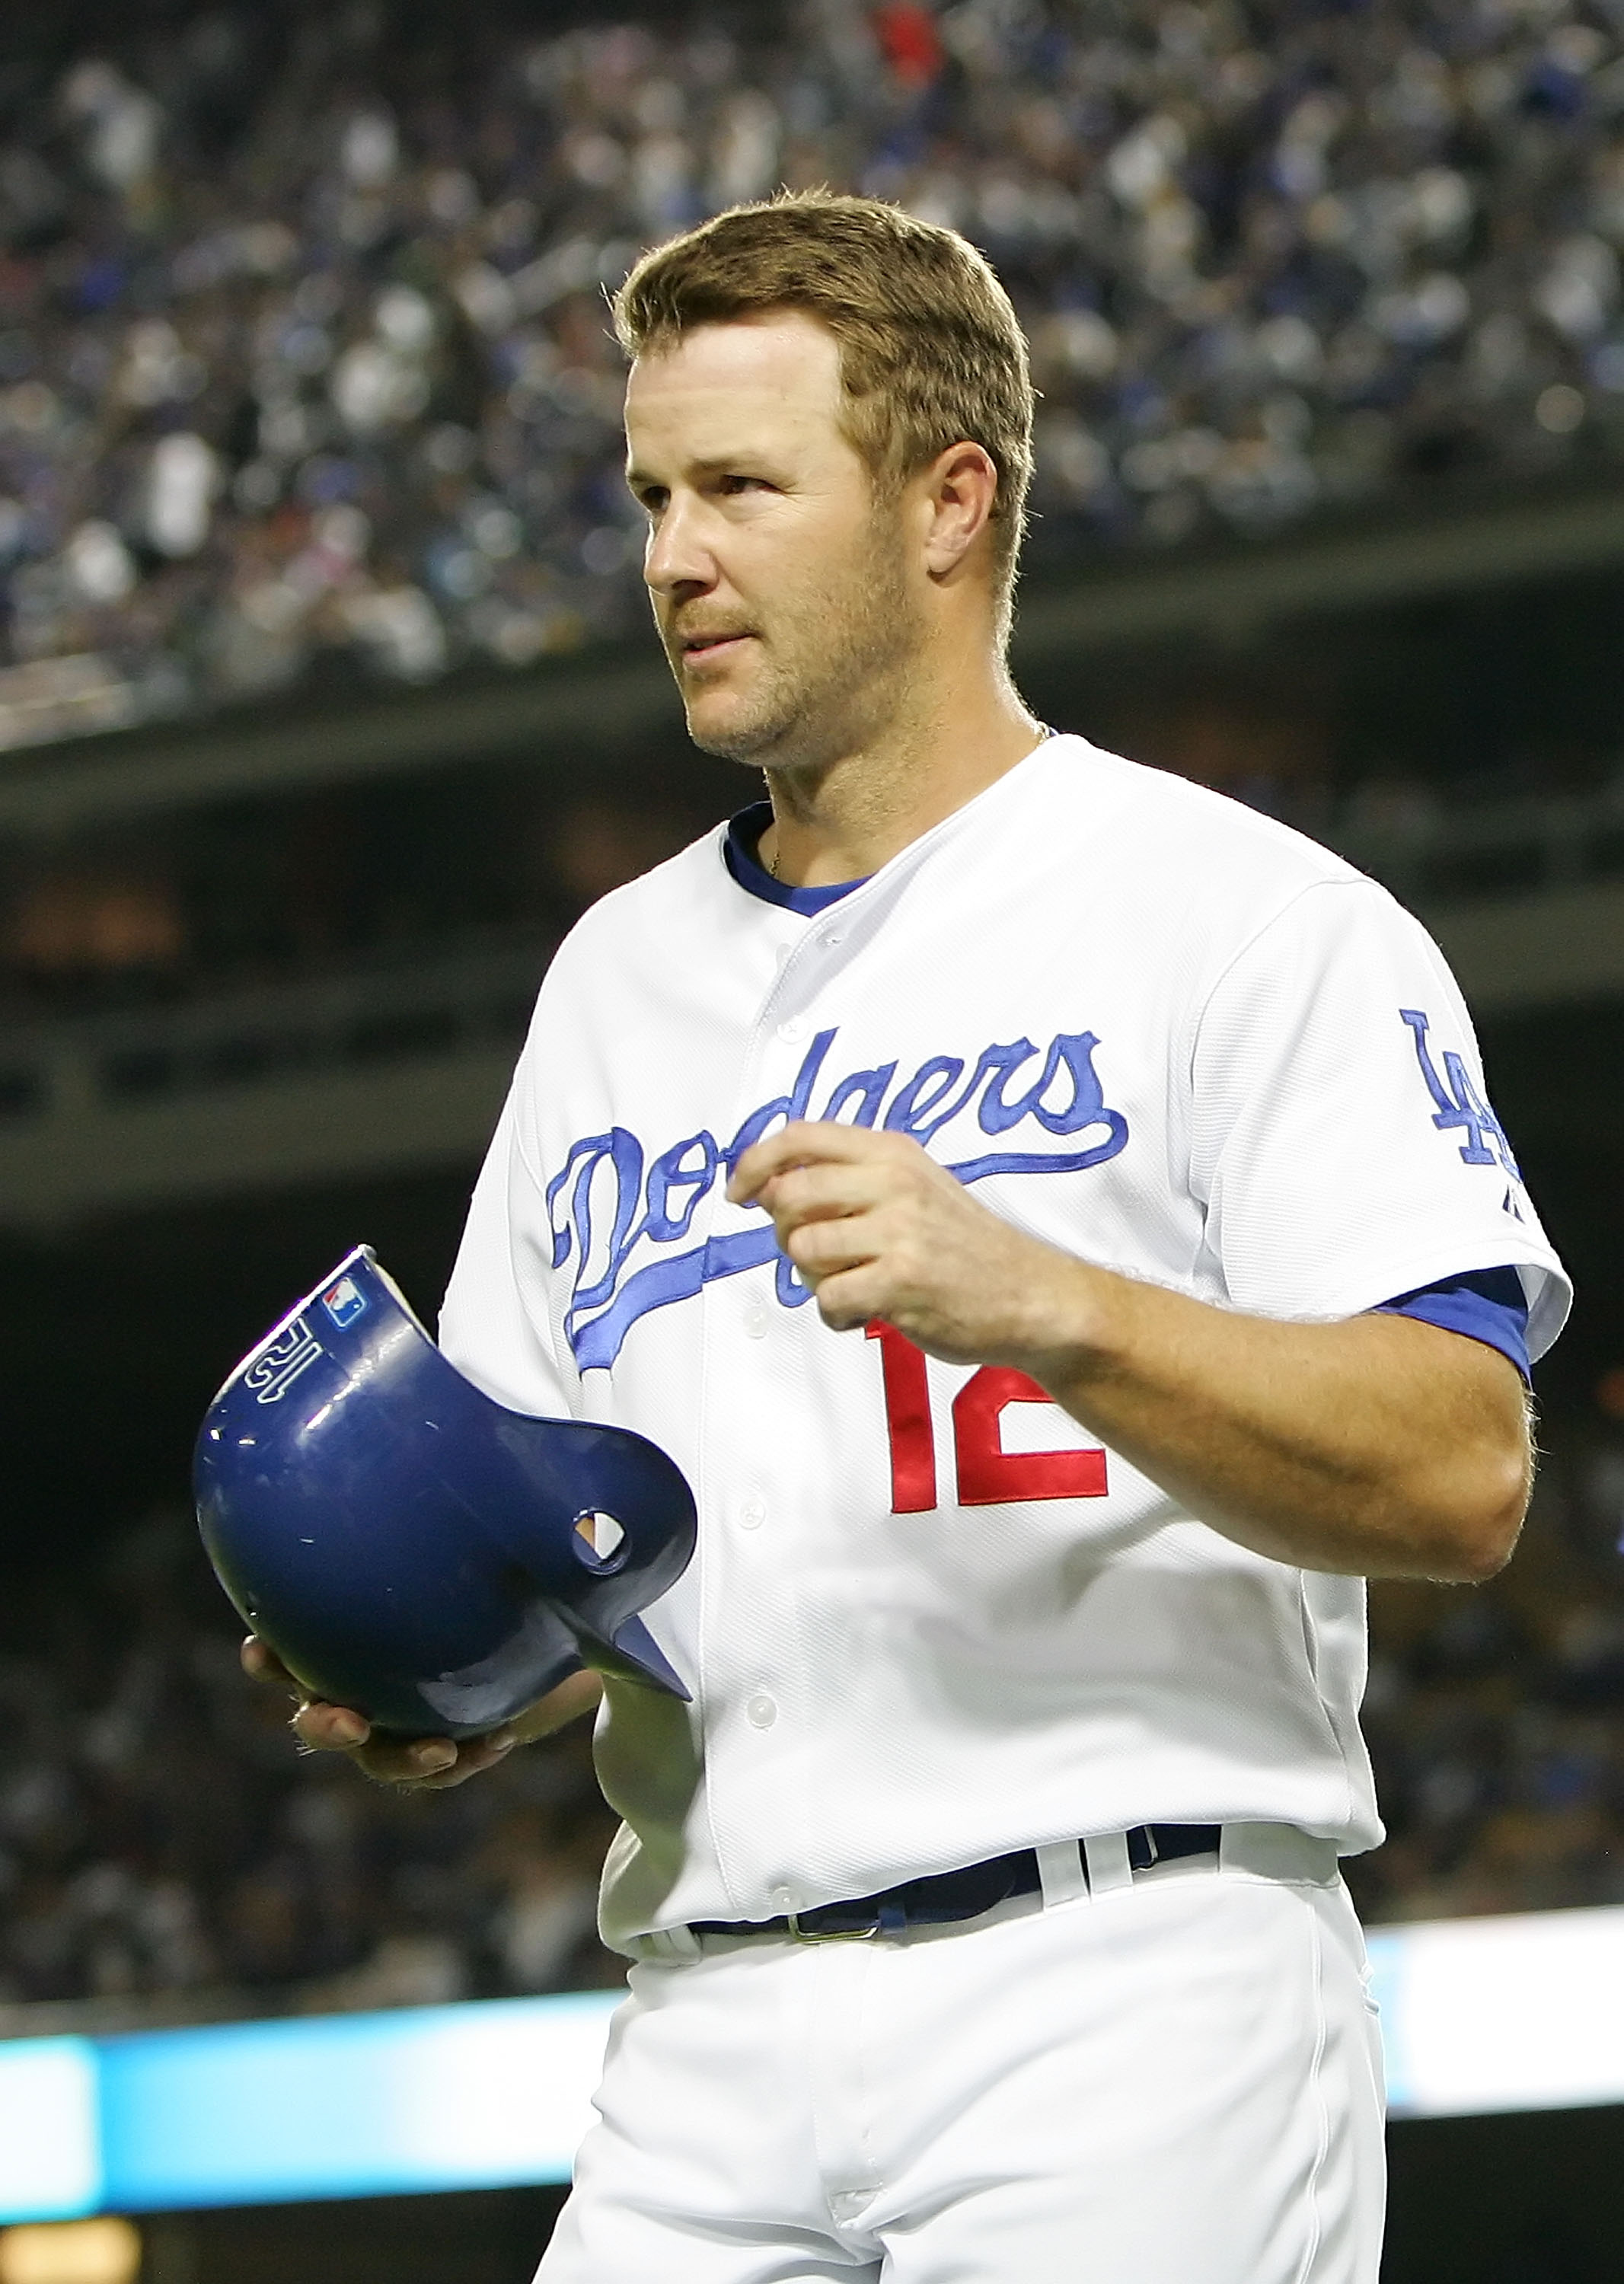 LOS ANGELES, CA - APRIL 25:  Jeff Kent #12 of the Los Angeles Dodgers returns to the dugout after scoring in the second inning against the Colorado Rockies at Dodger Stadium on April 25, 2008 in Los Angeles, California.  (Photo by Lisa Blumenfeld/Getty Im